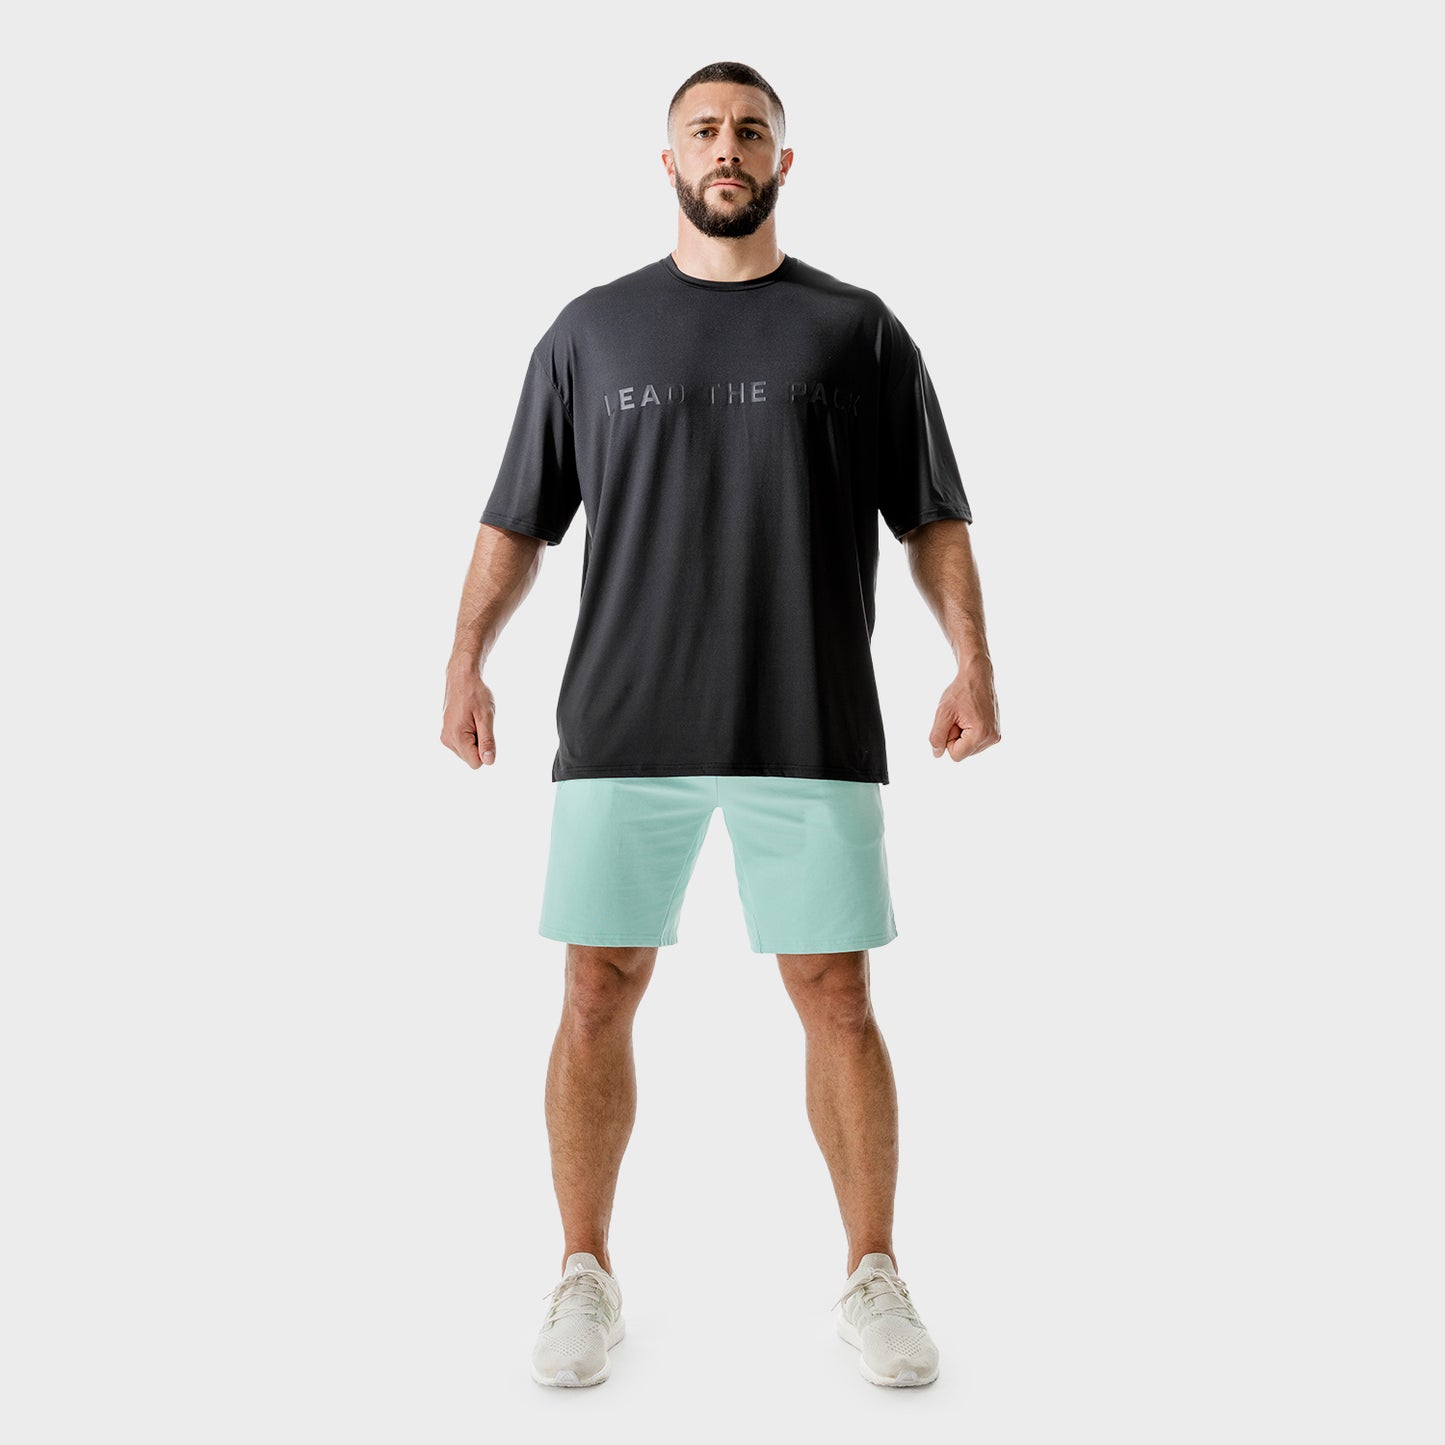 squatwolf-gym-wear-lab-360-oversized-tee-black-workout-shirts-for-men